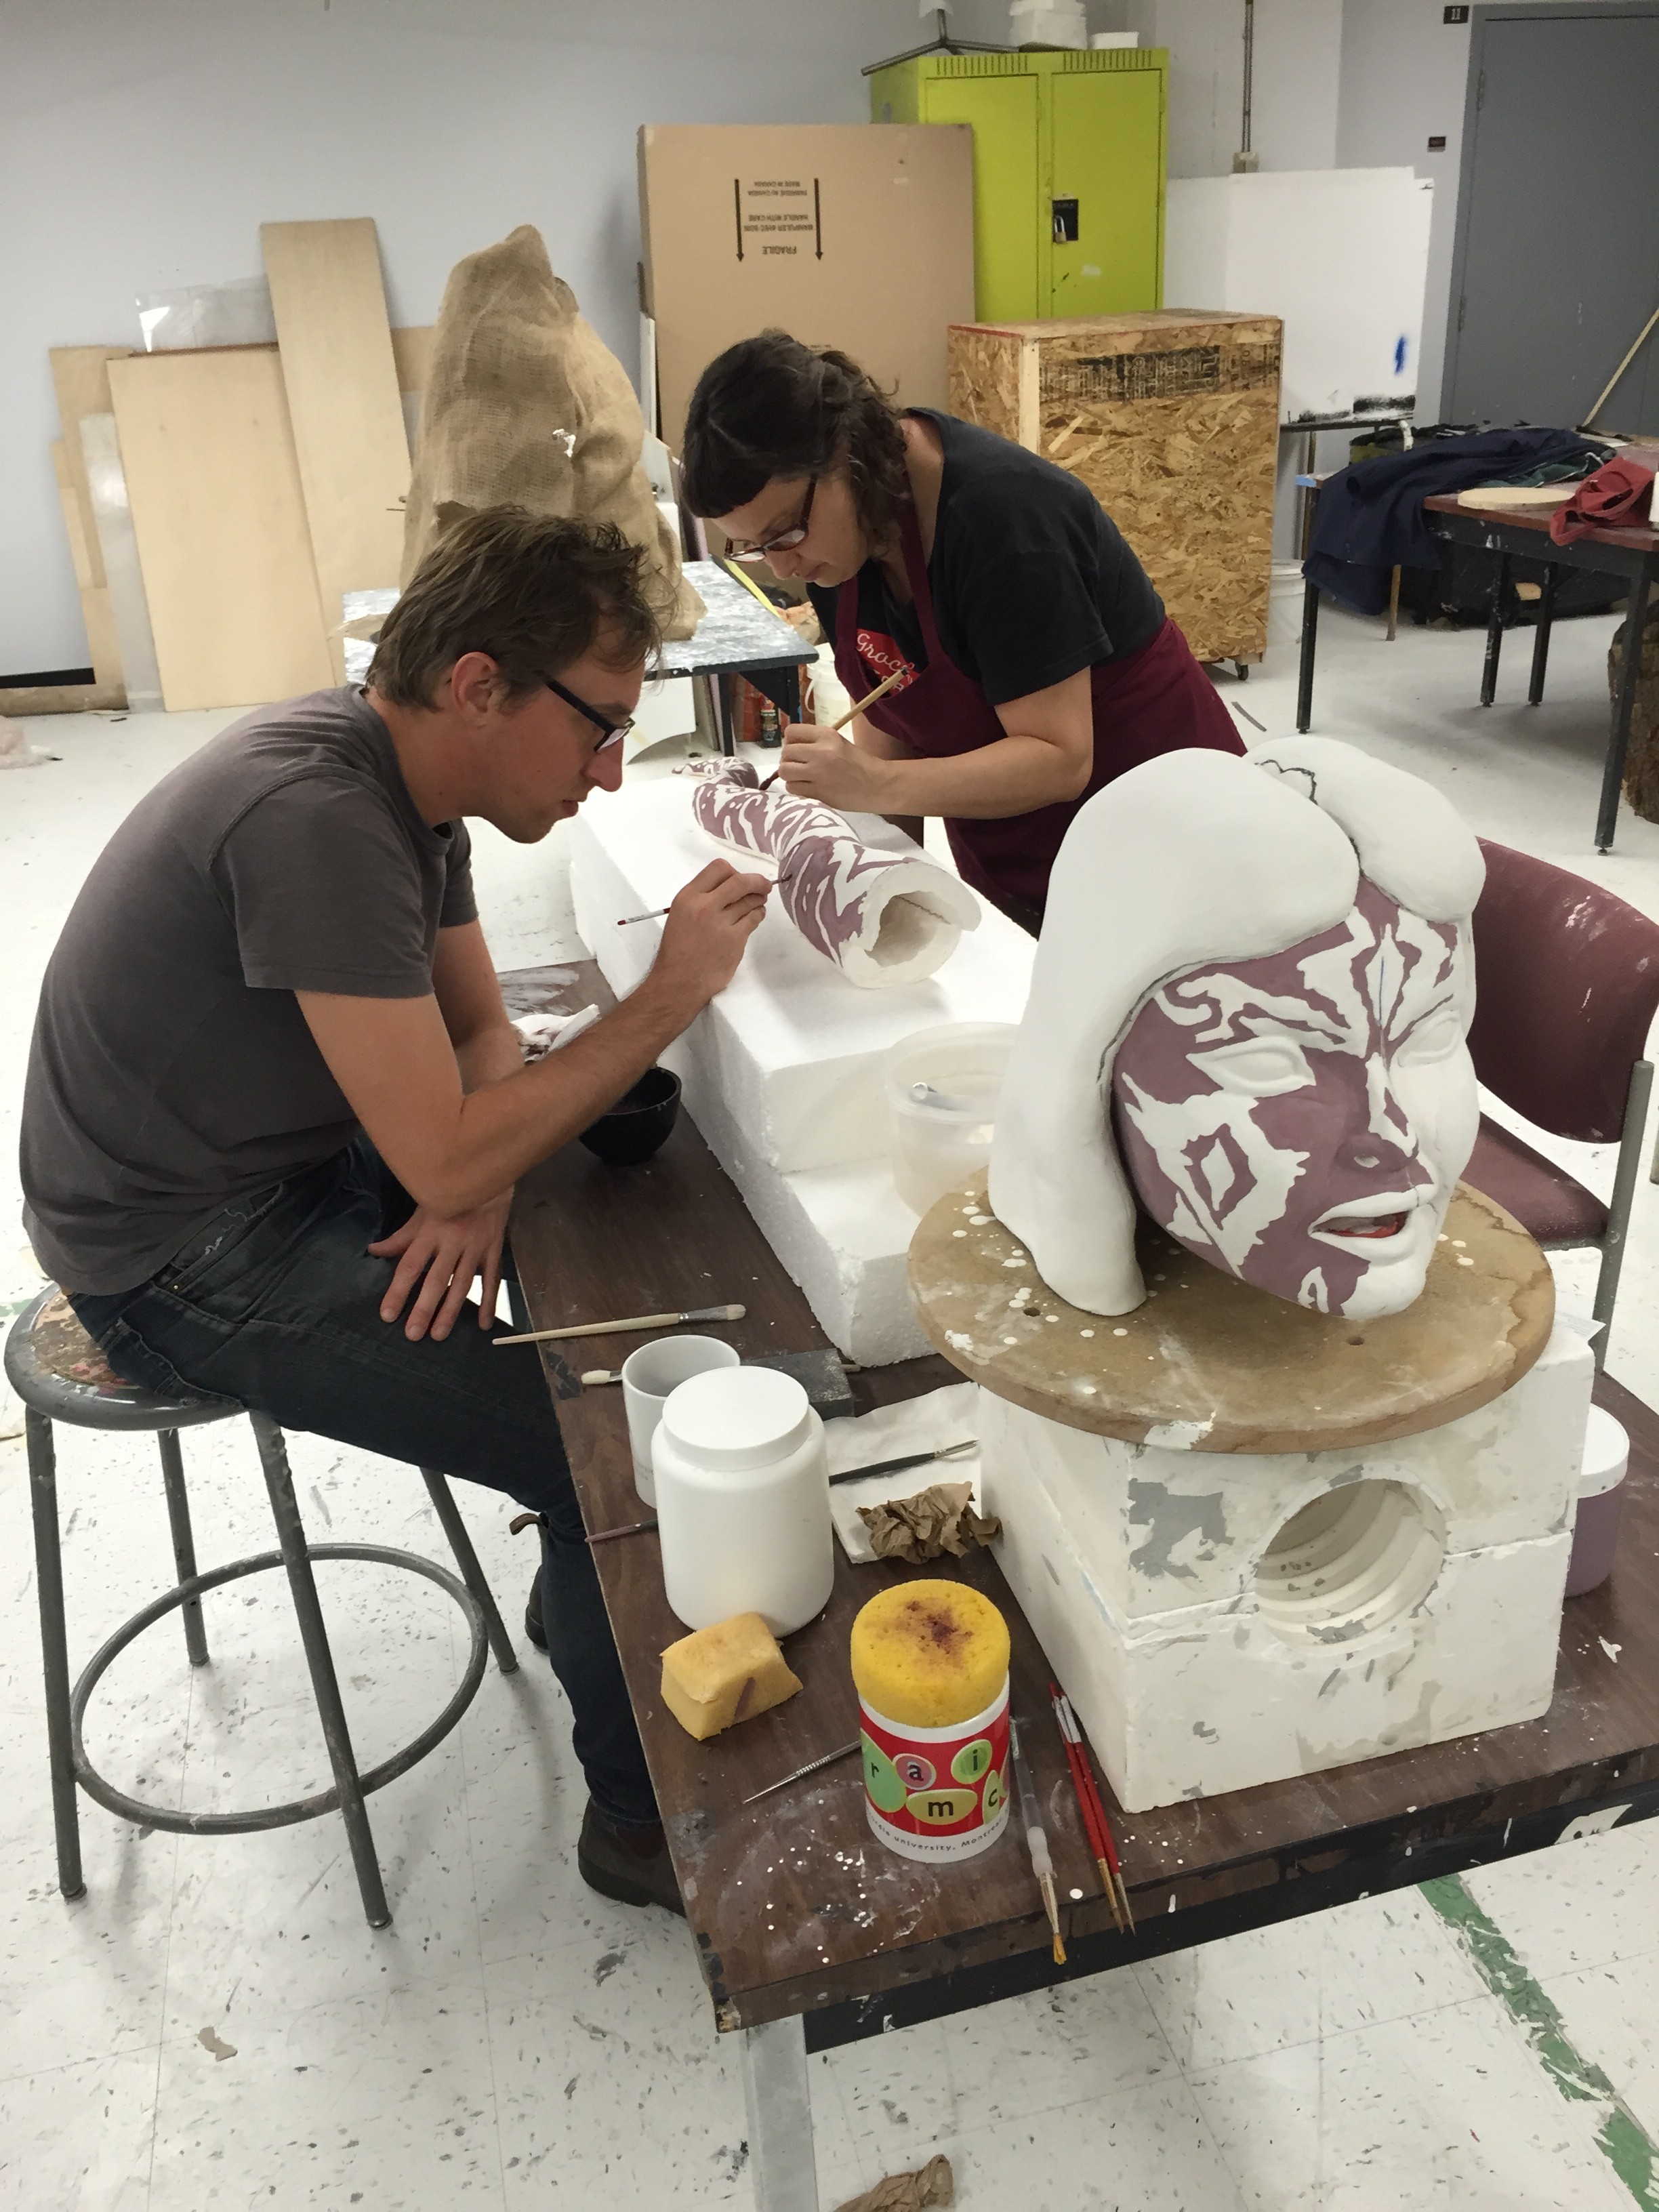 Steve and Susan painstakingly paint transparent and mirror glaze on bisqued sculpture